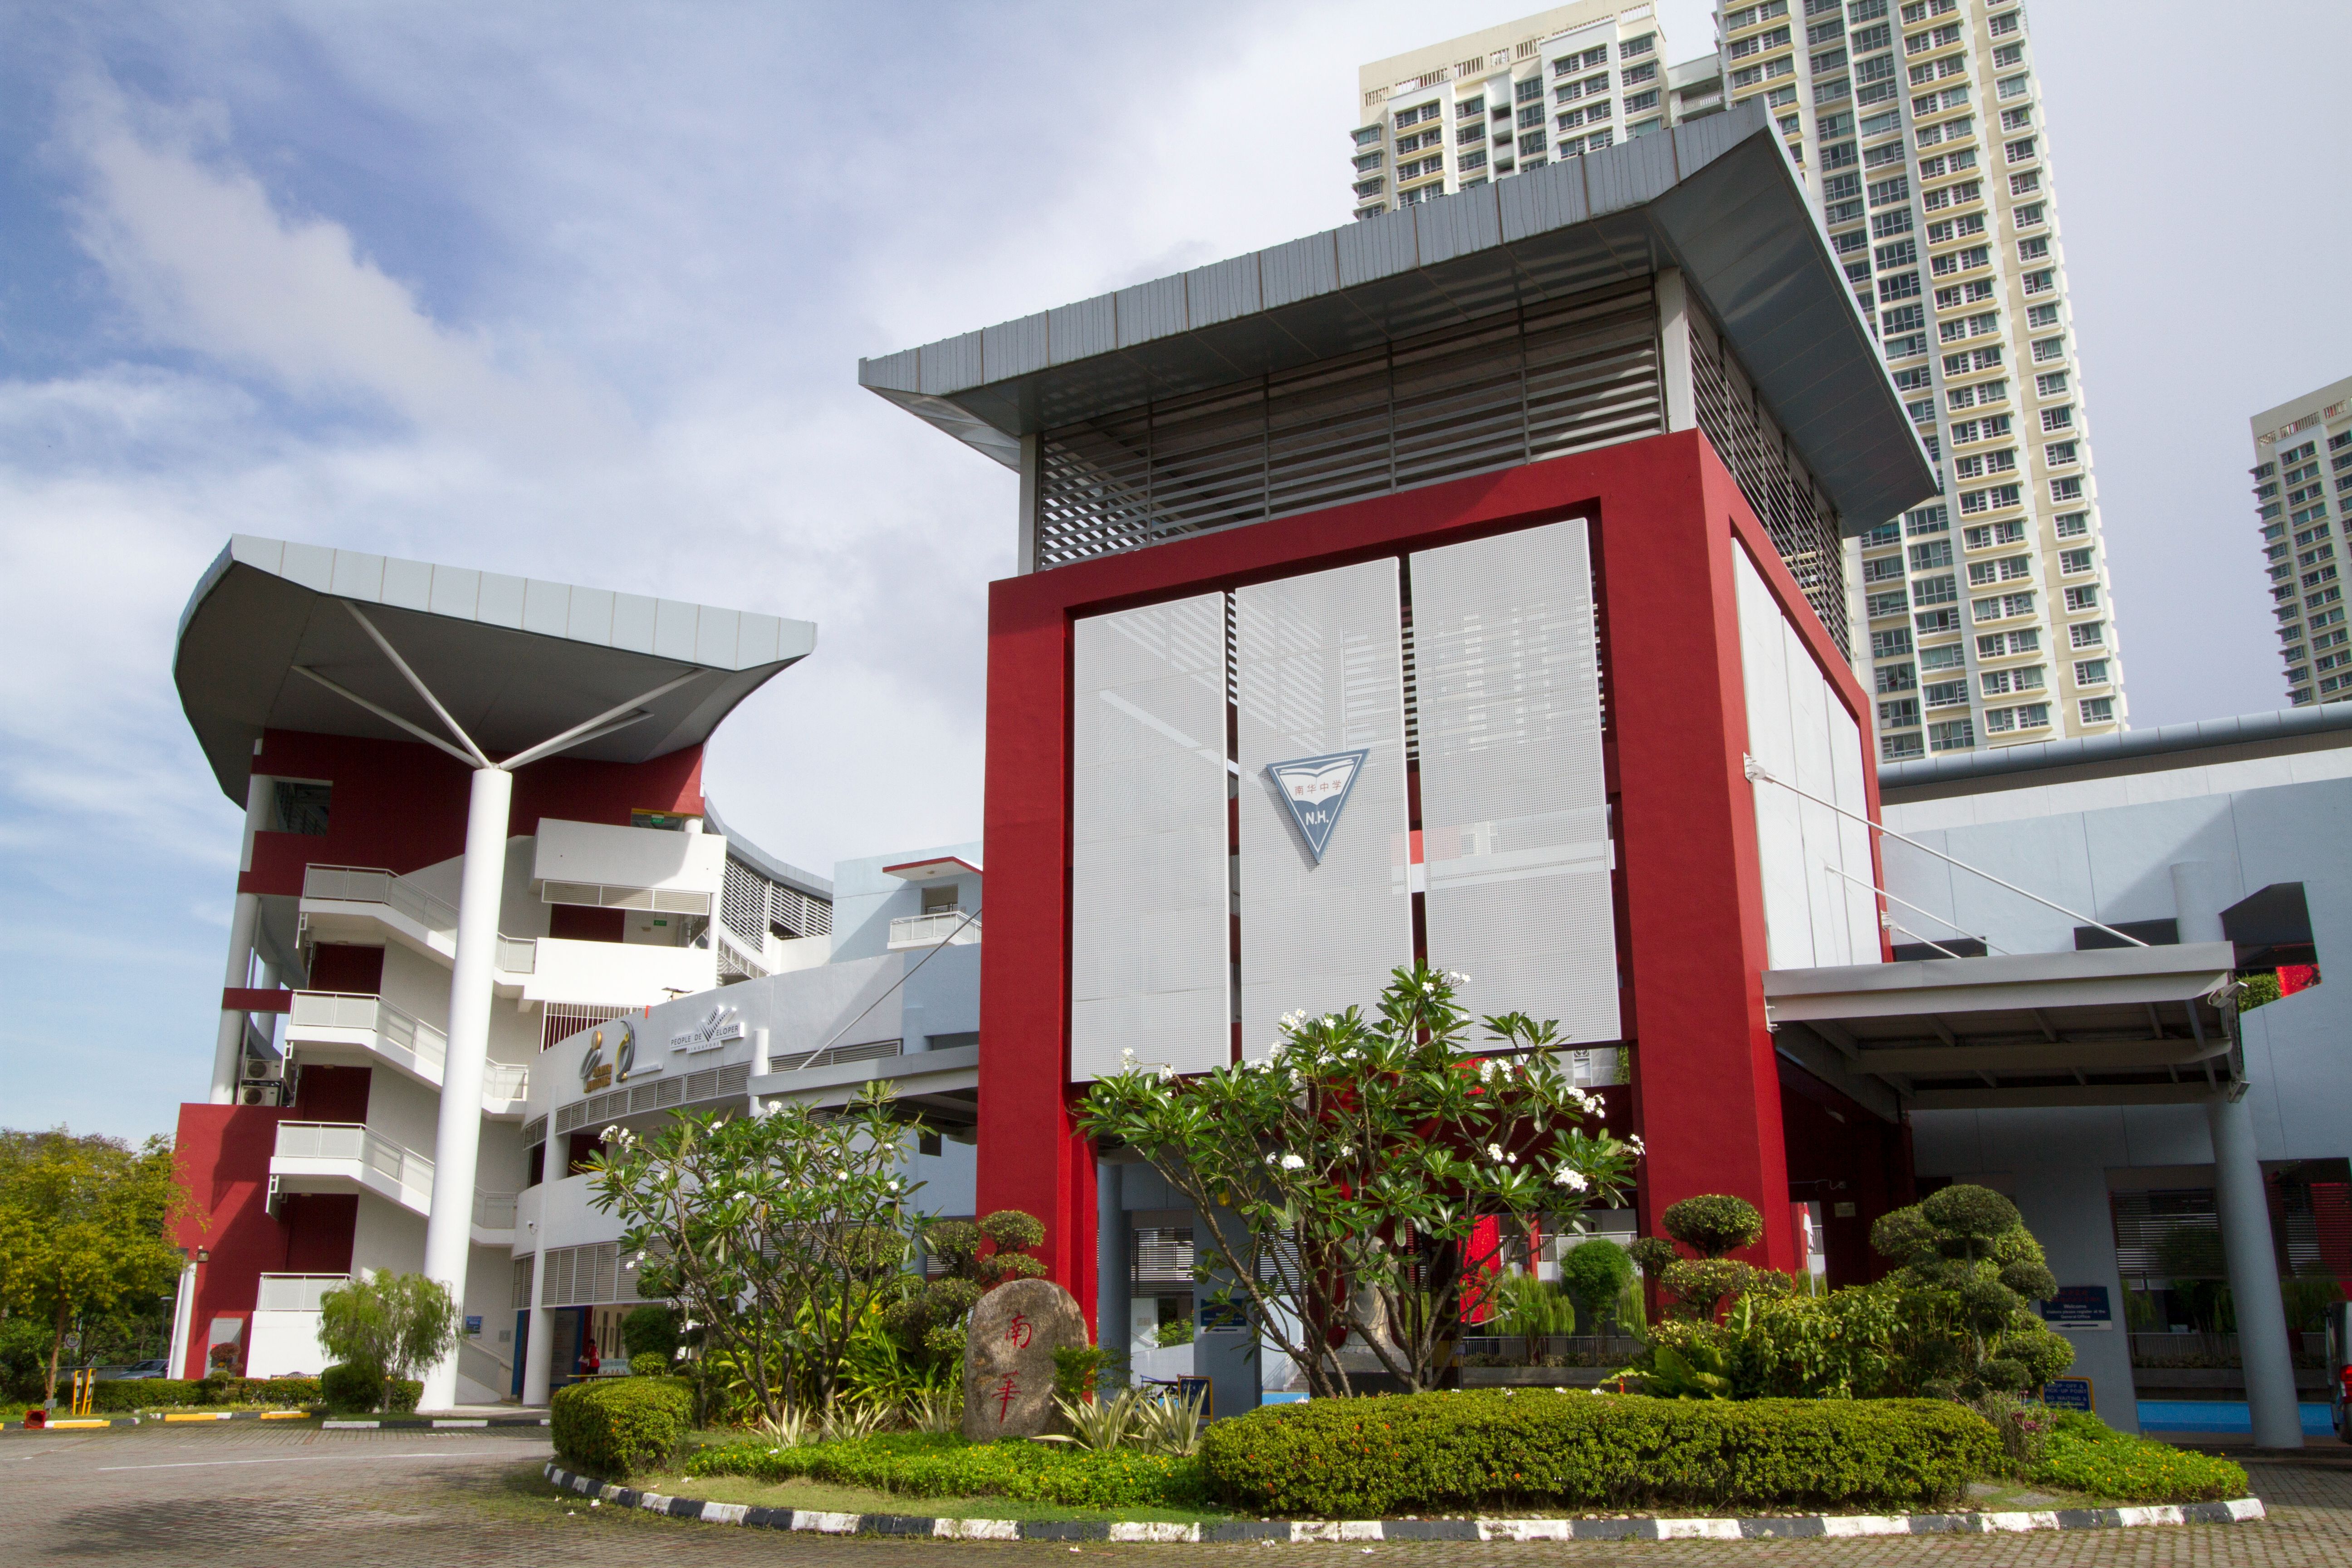 Nan Hua High School's current location at 41, Clementi Ave 1.